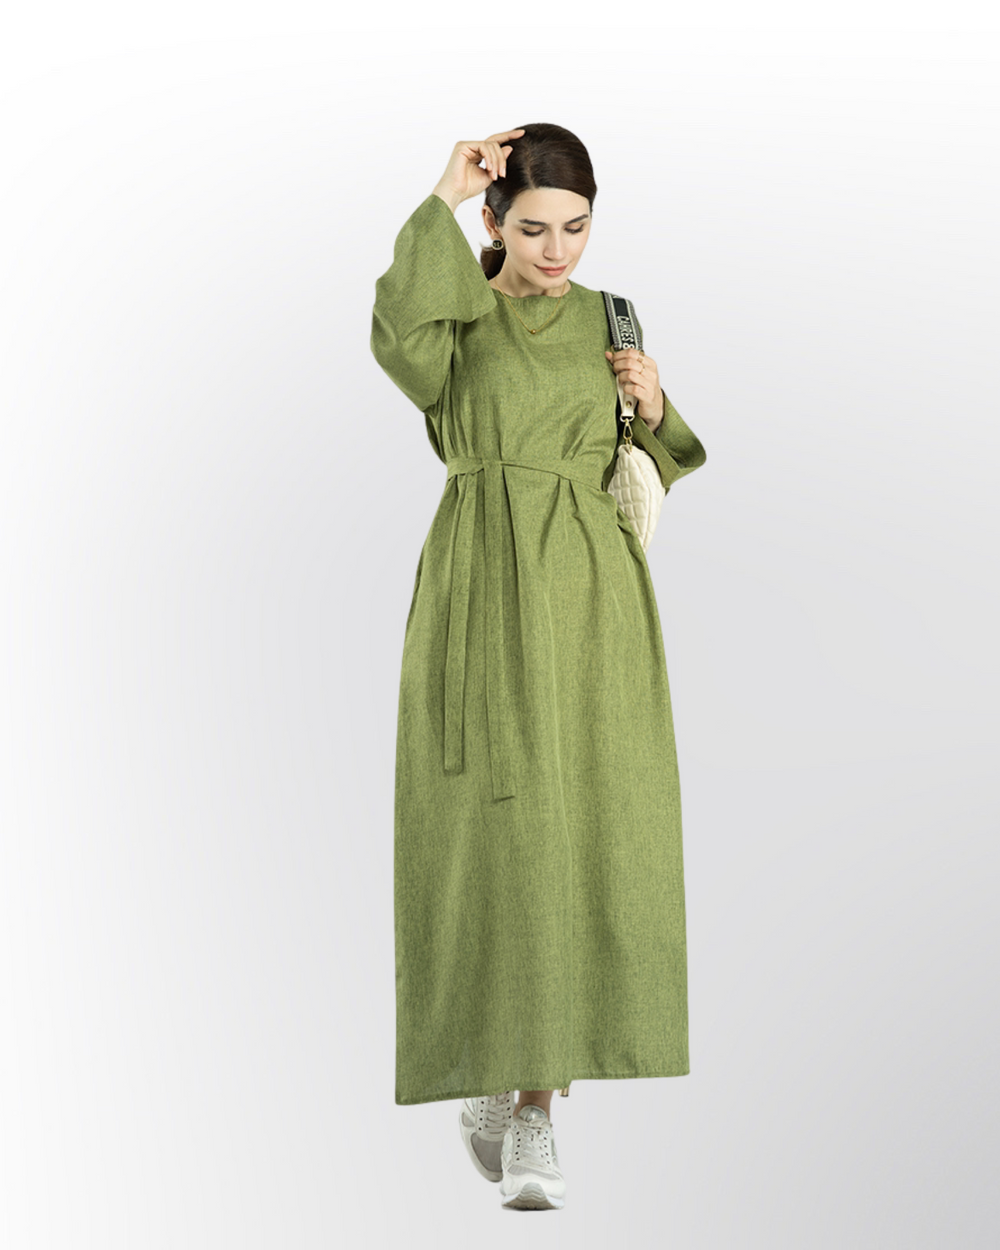 Get trendy with Elora Linen Set - Pistachio - Dresses available at Voilee NY. Grab yours for $99.90 today!